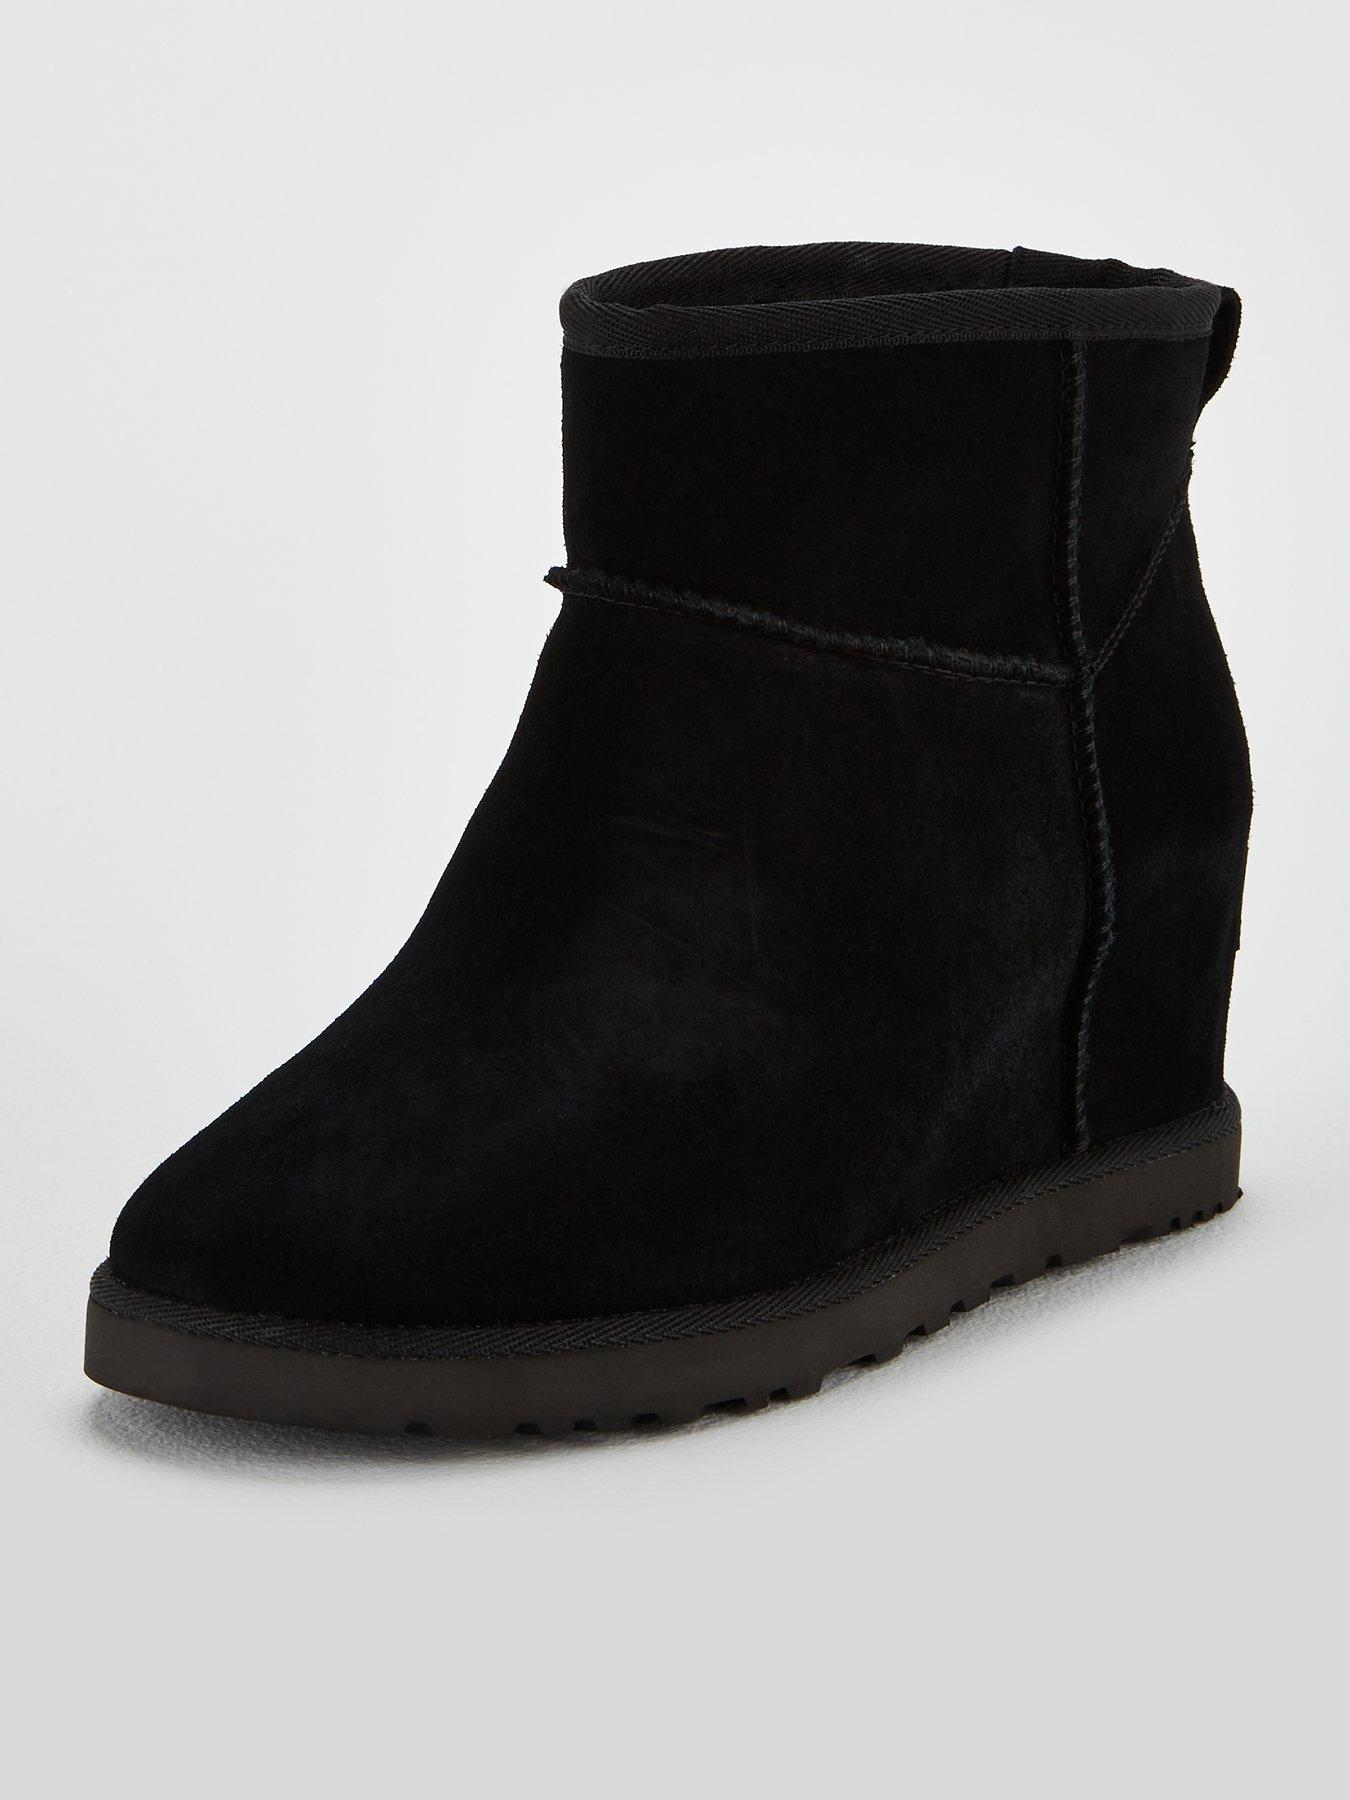 ugg short wedge boots